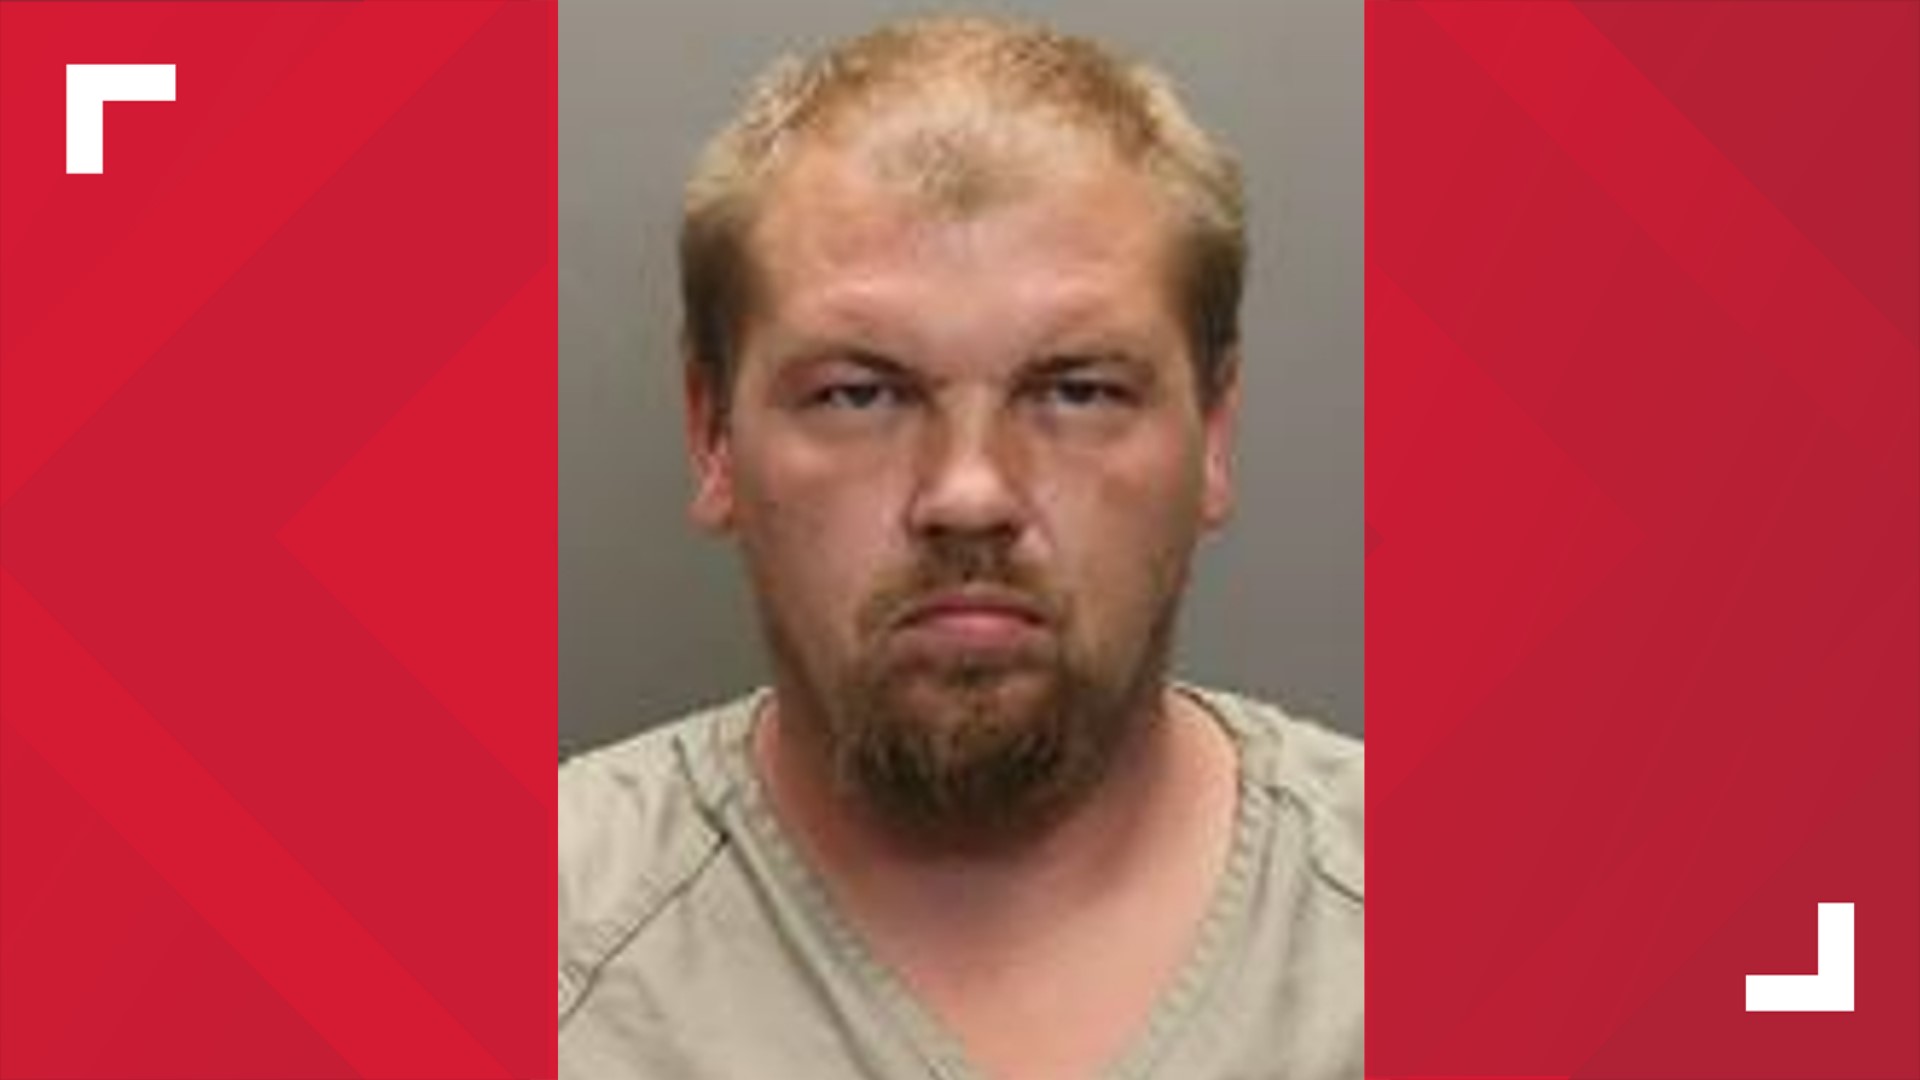 Krieg Butler was indicted in the Franklin County Court of Common Pleas with improper handling of a firearm and tampering with evidence.